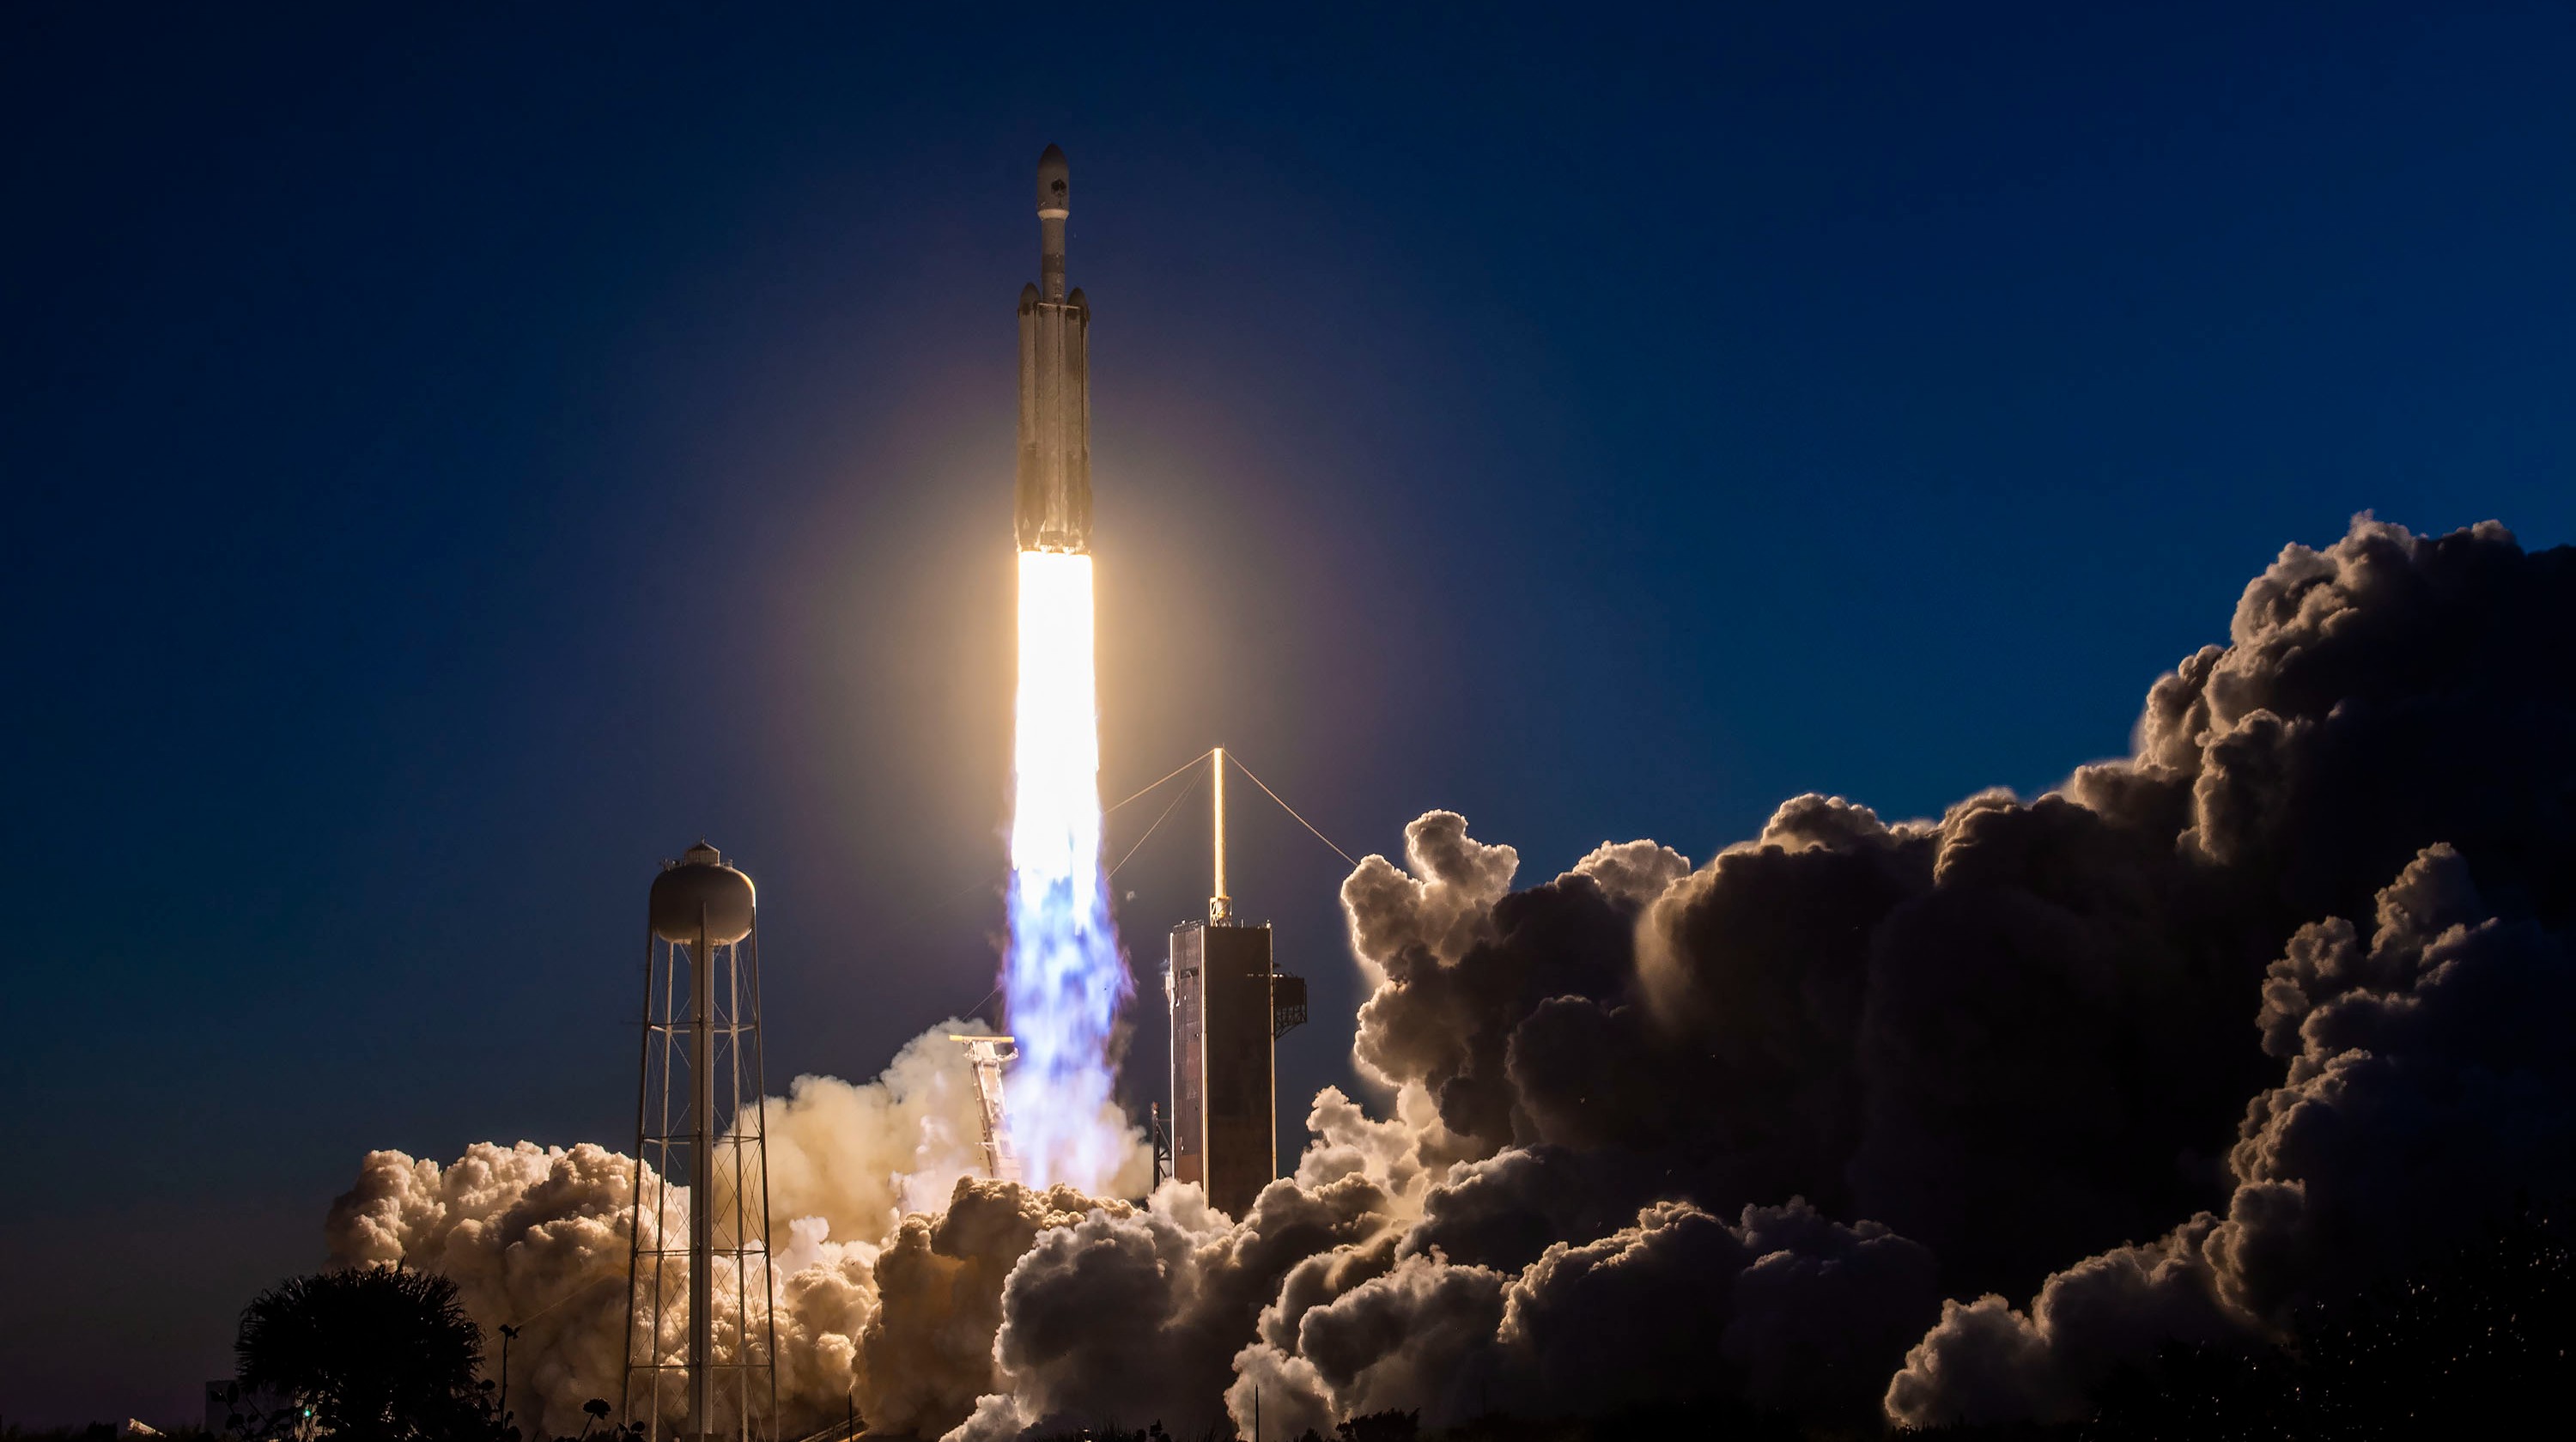 Watch SpaceX's Falcon Heavy rocket launch on record-breaking mission tonight